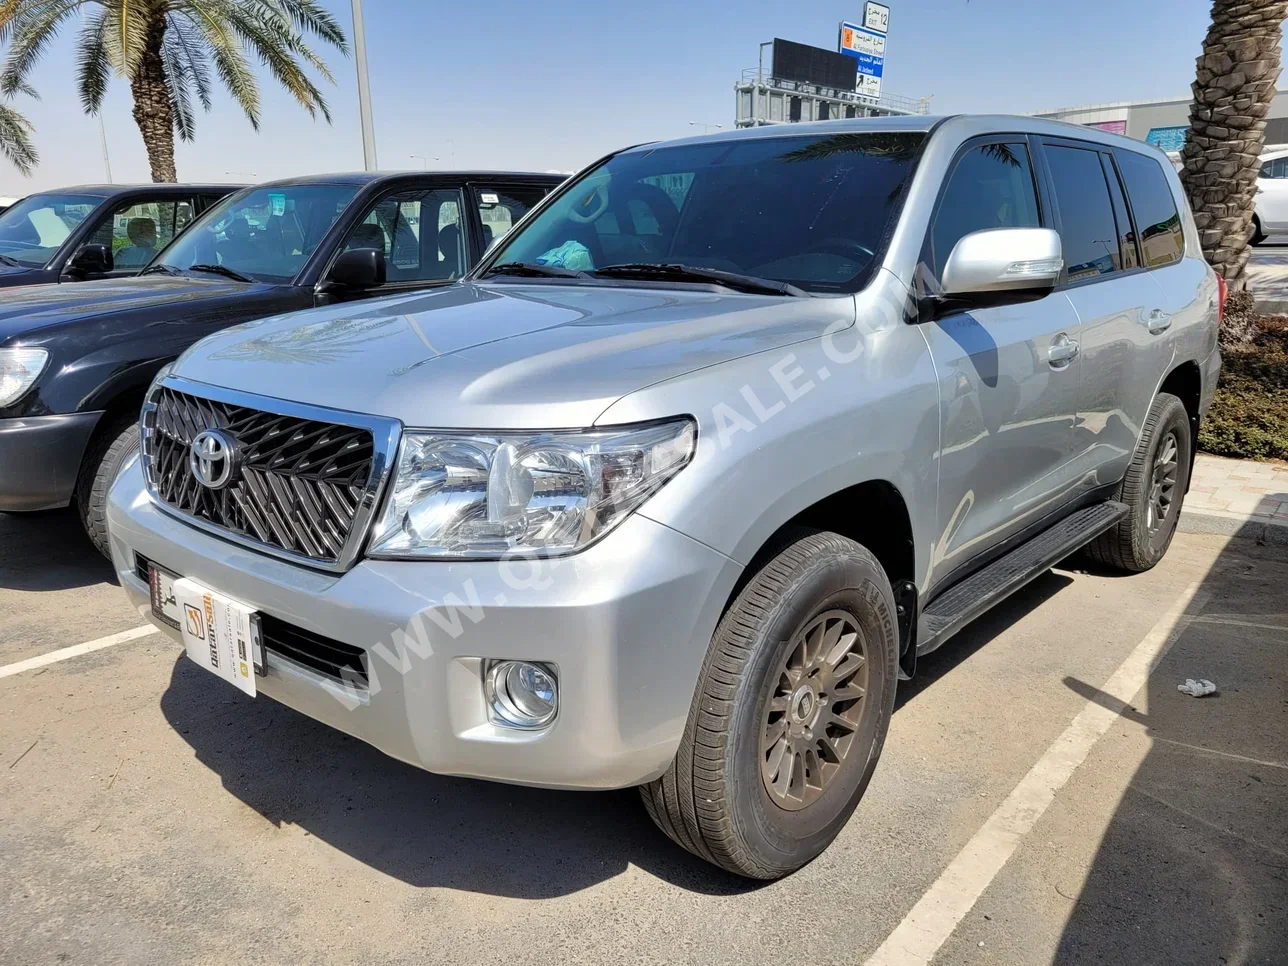 Toyota  Land Cruiser  G  2011  Automatic  20,000 Km  6 Cylinder  Four Wheel Drive (4WD)  SUV  Silver